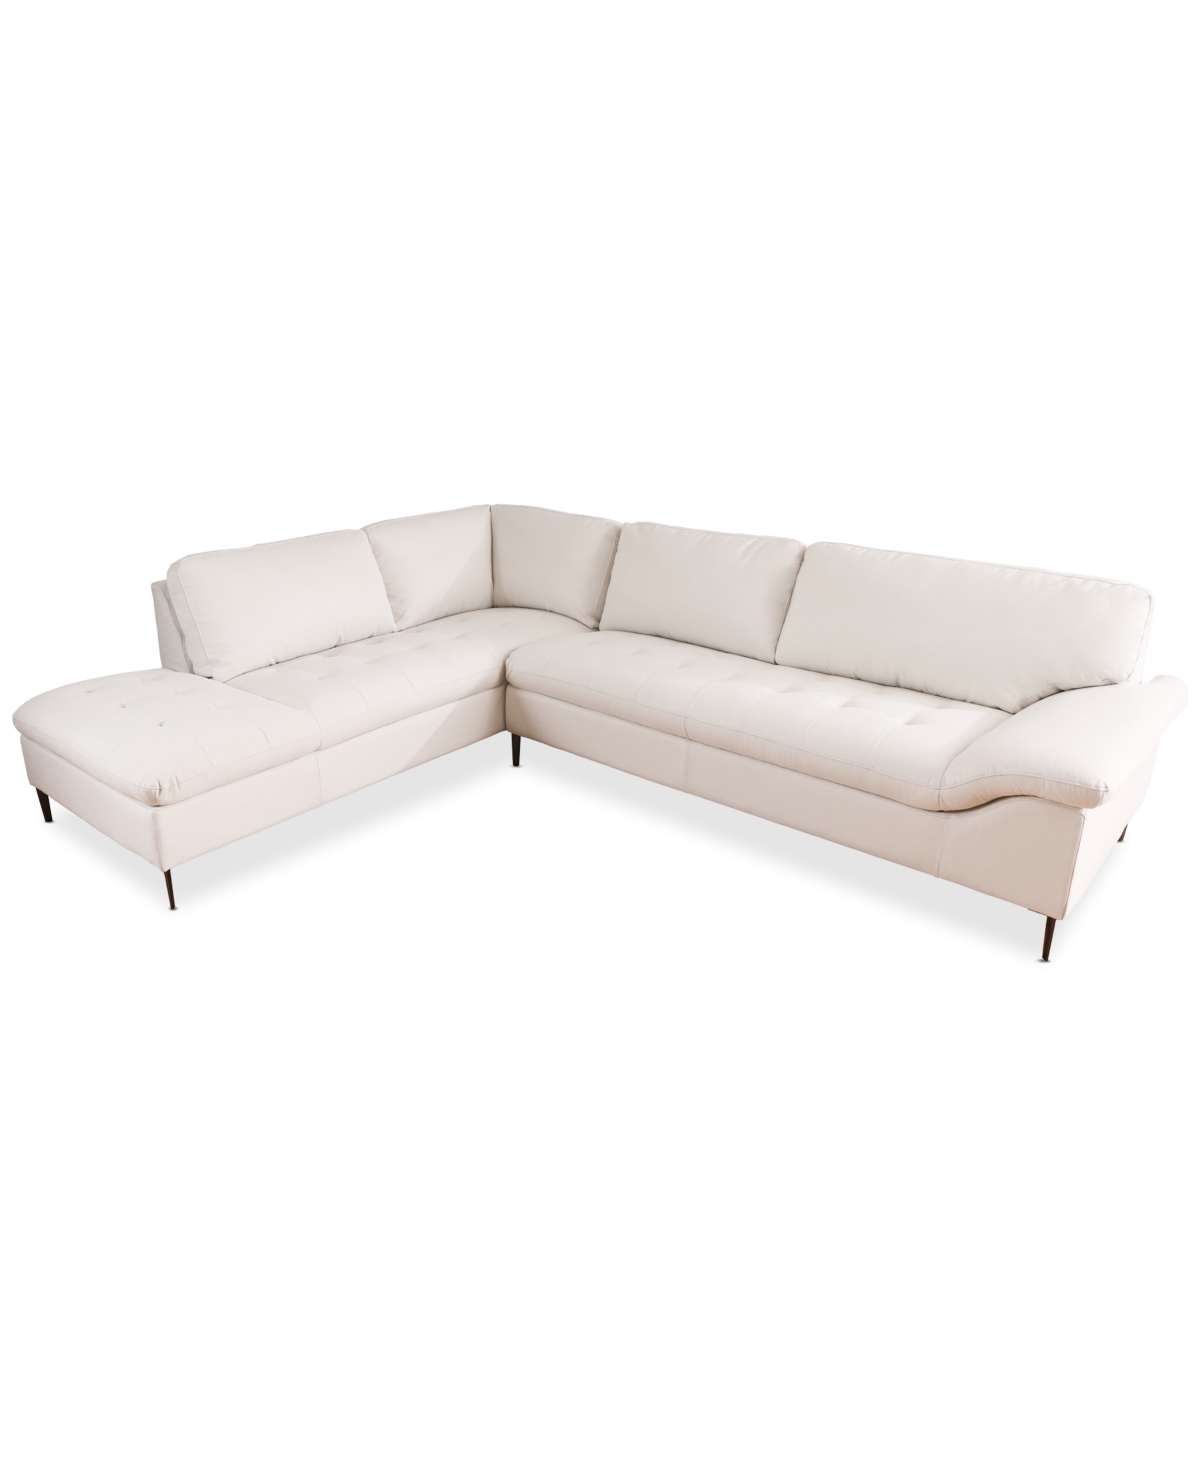 Furniture Closeout! Torbin 90" 2-pc. Fabric Sectional Sofa, Created For Macy's In Cream